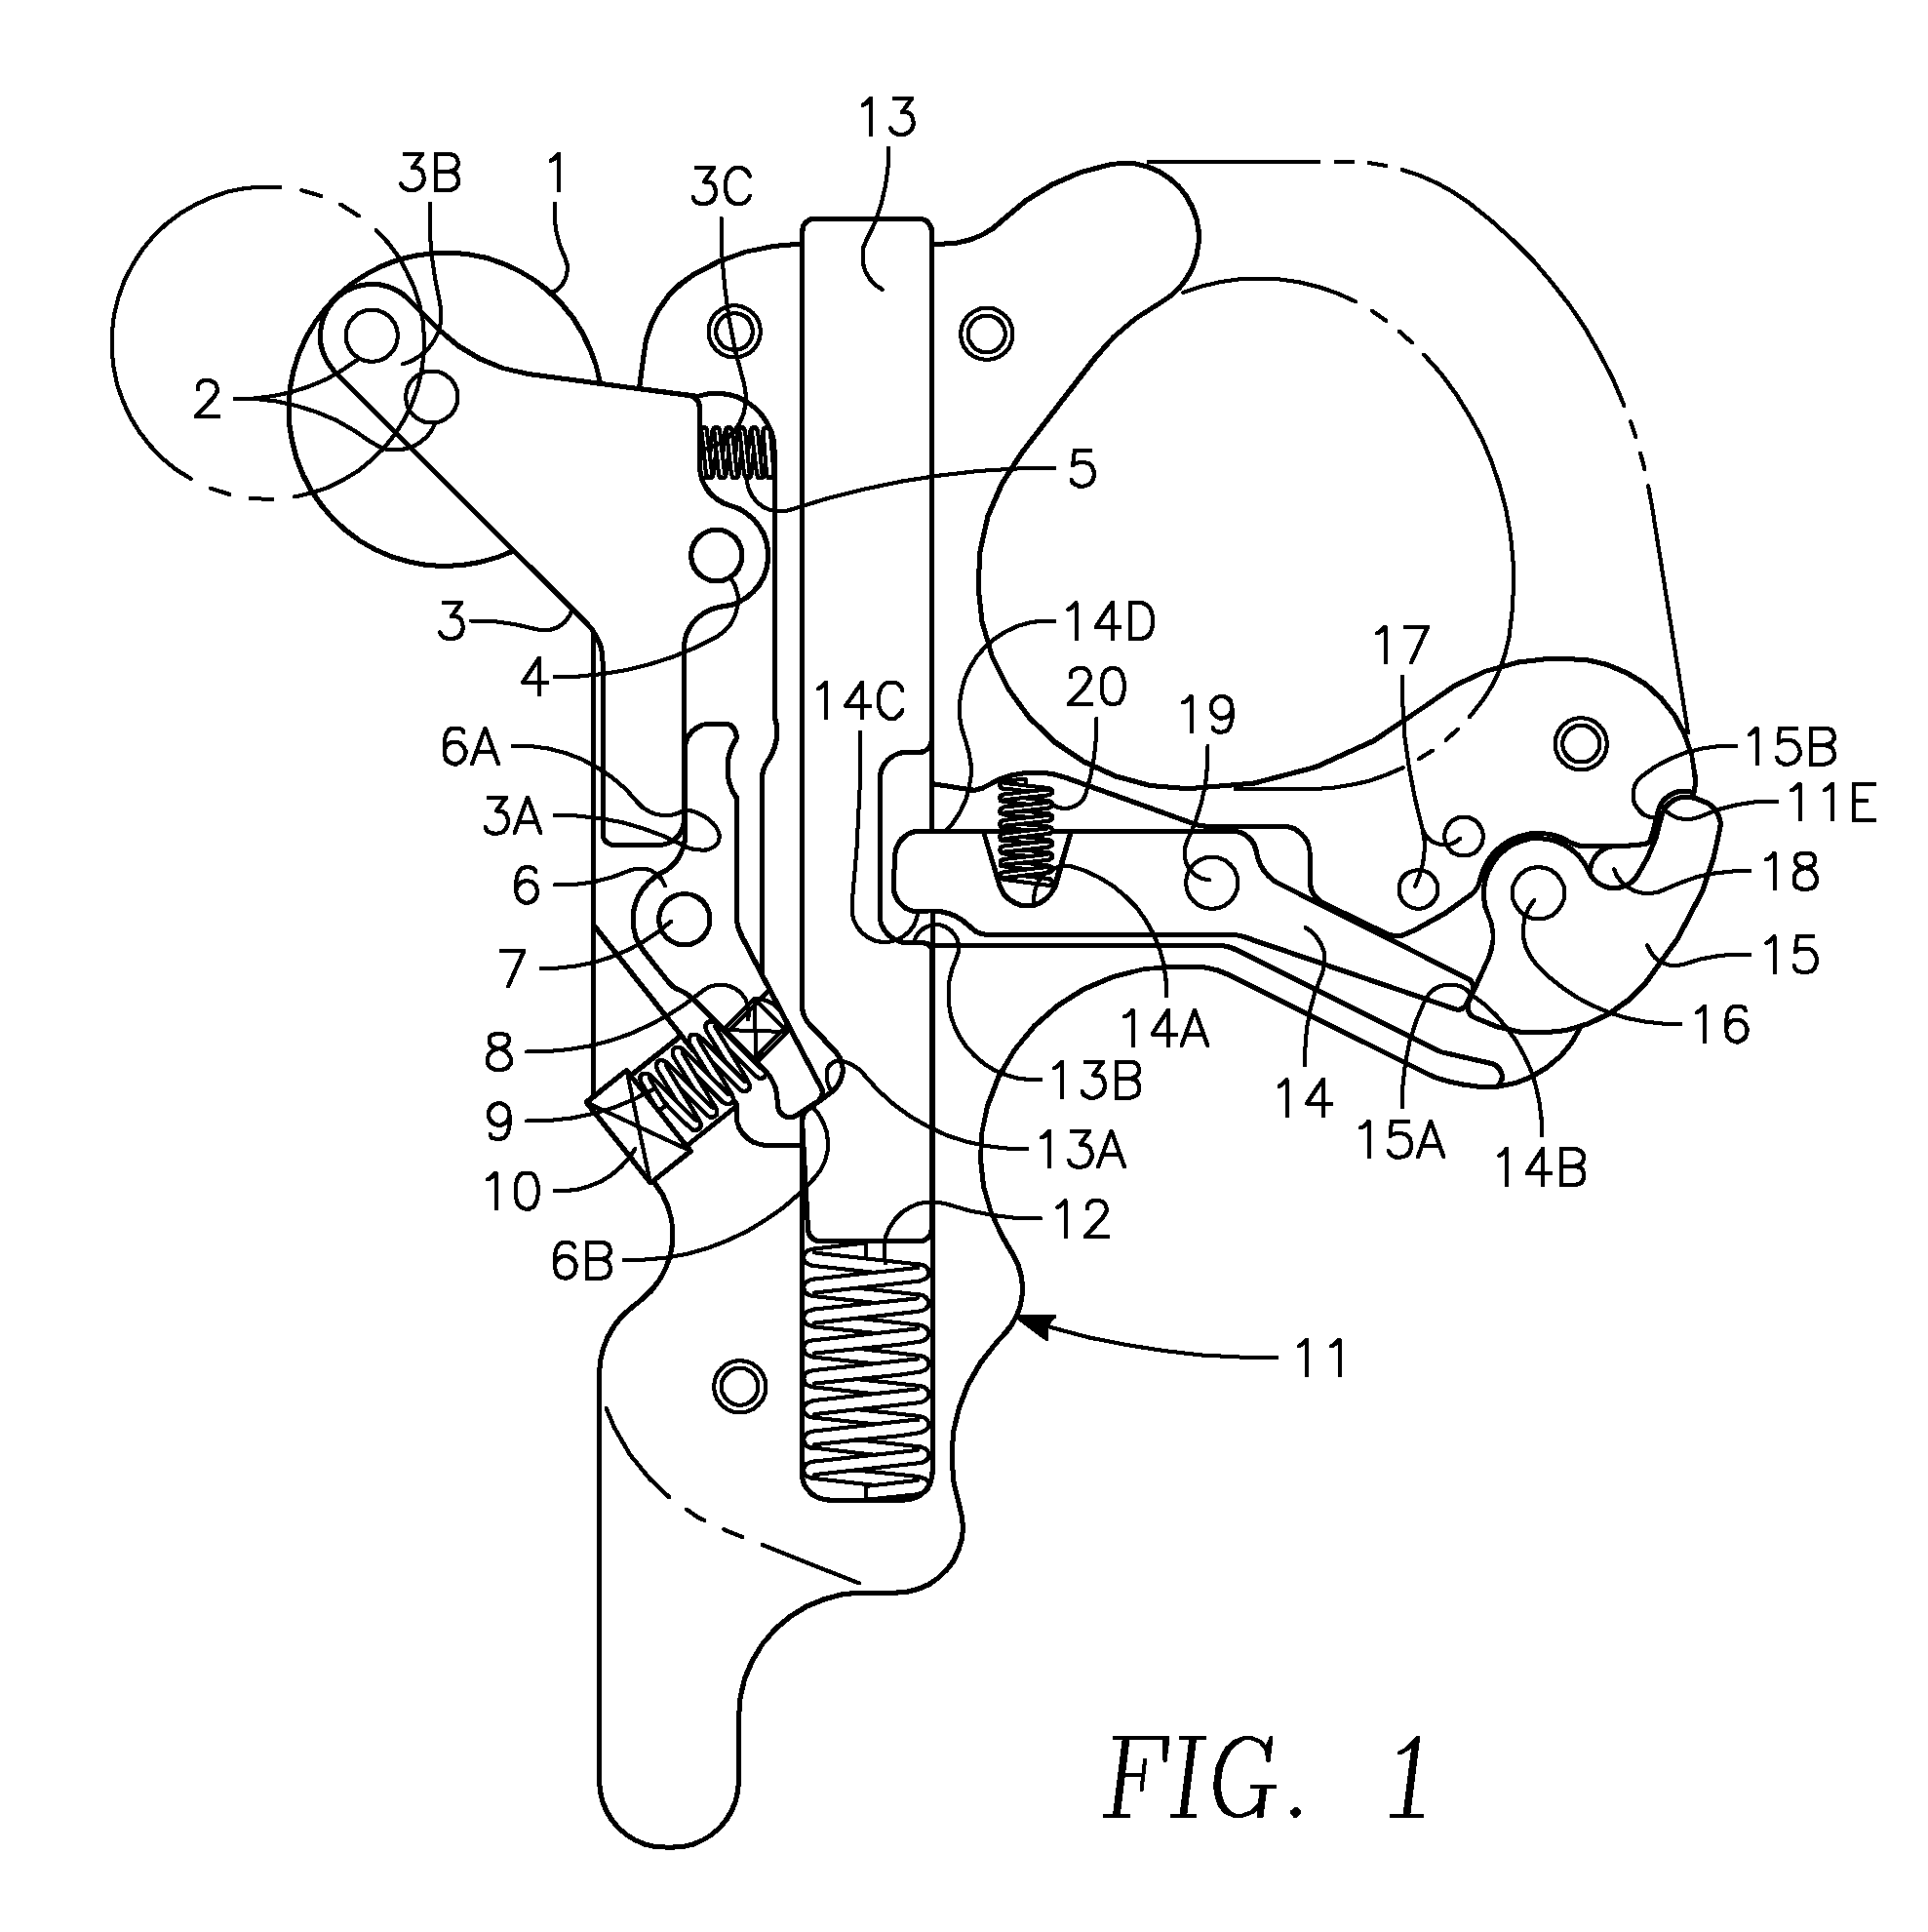 Bow string capture and release device